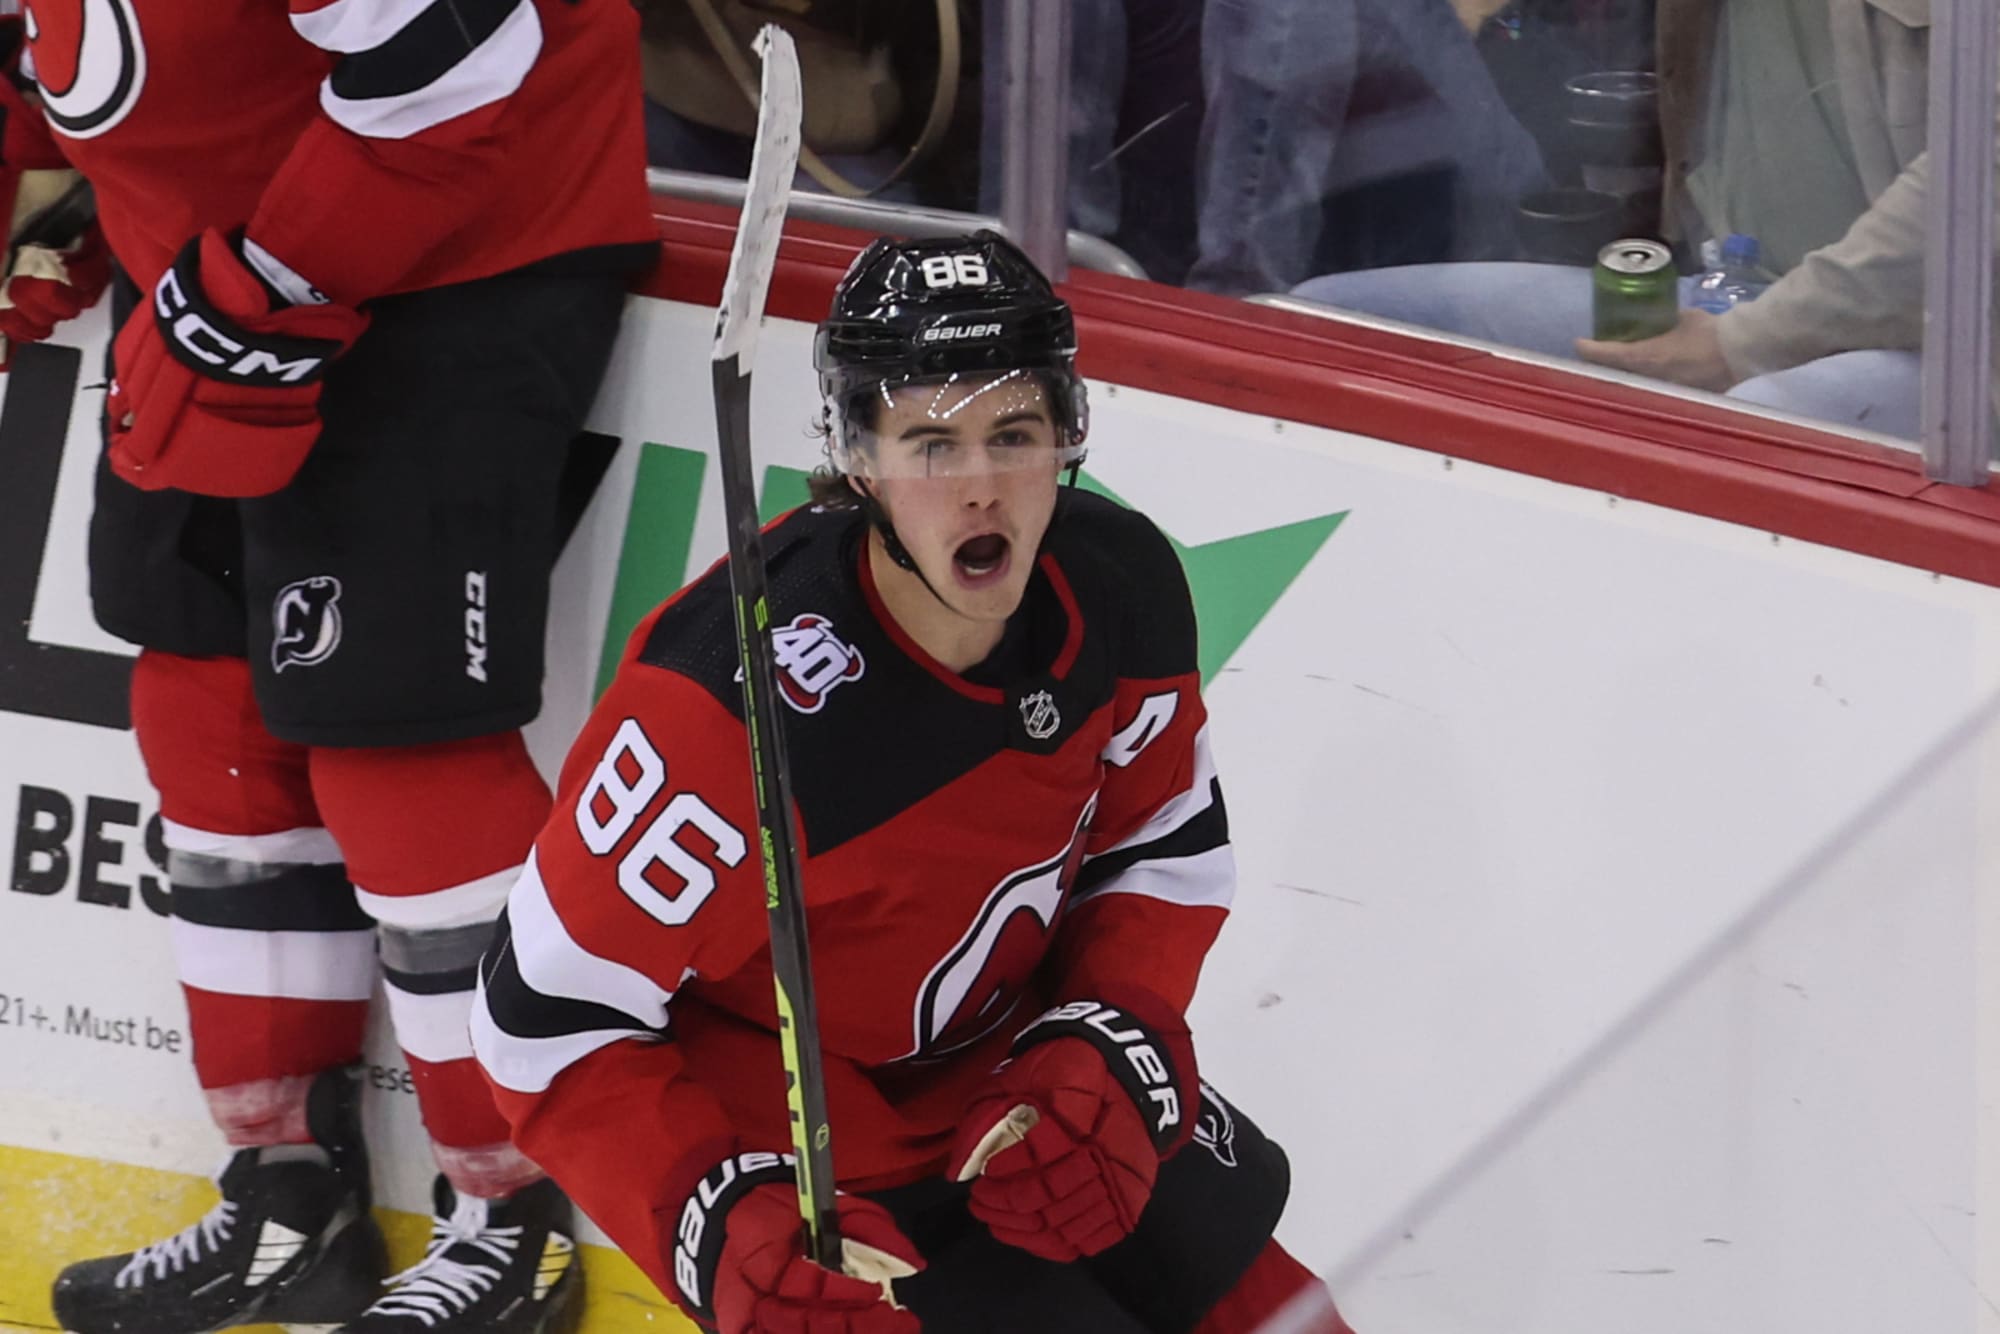 Devils need Jack Hughes and Nico Hischier to take next step